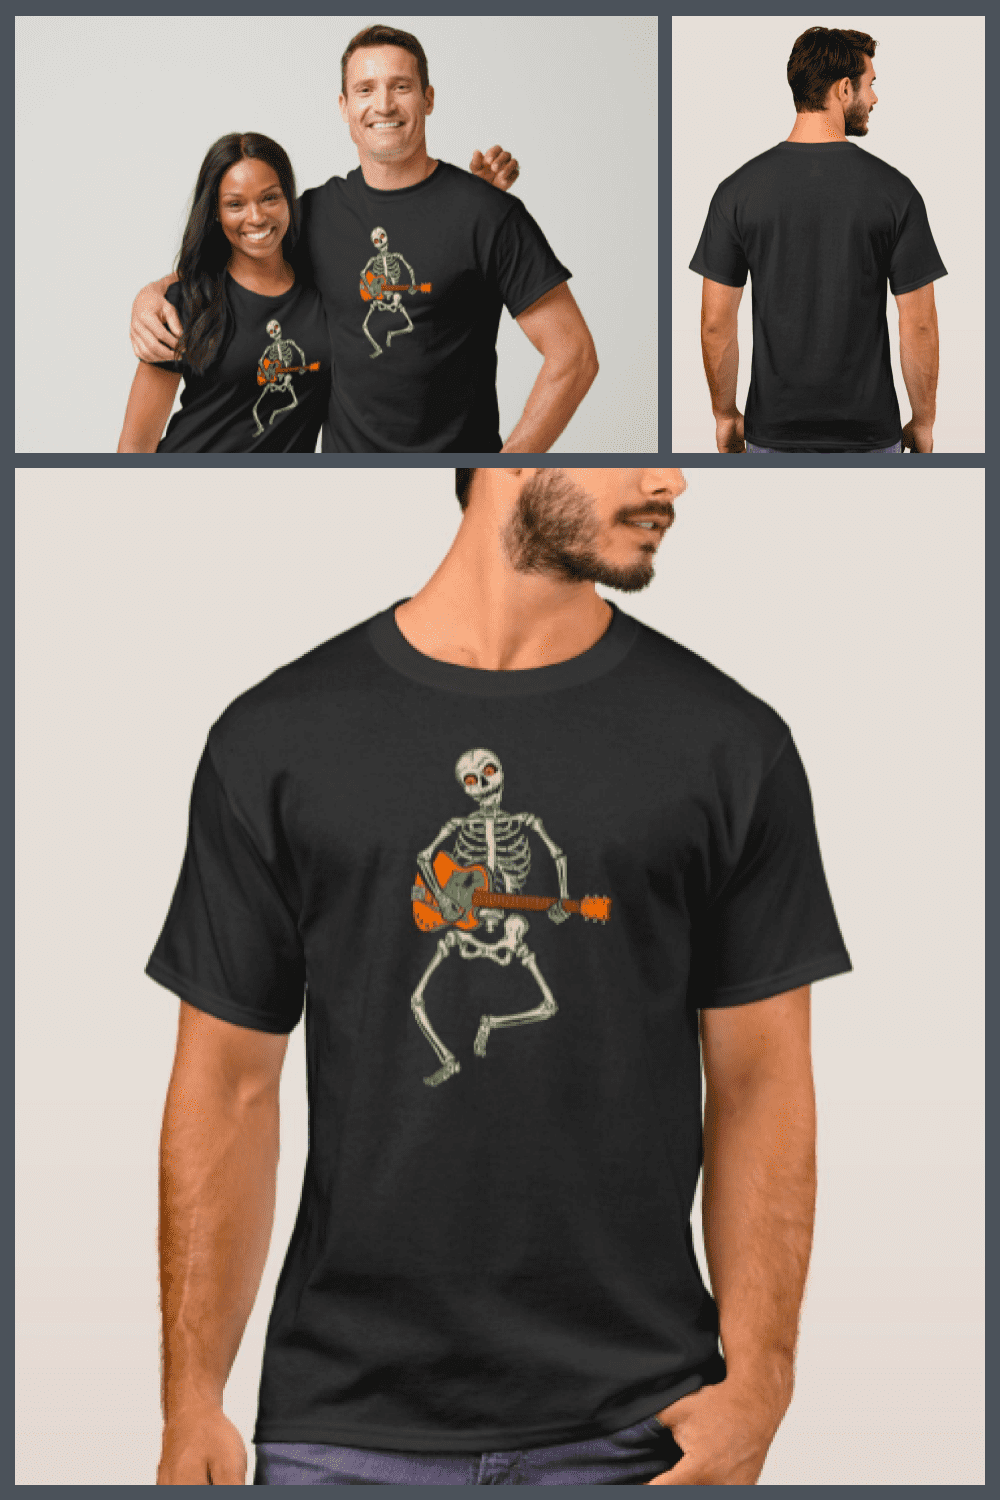 The cheerful skeleton plays the guitar and cheers up.